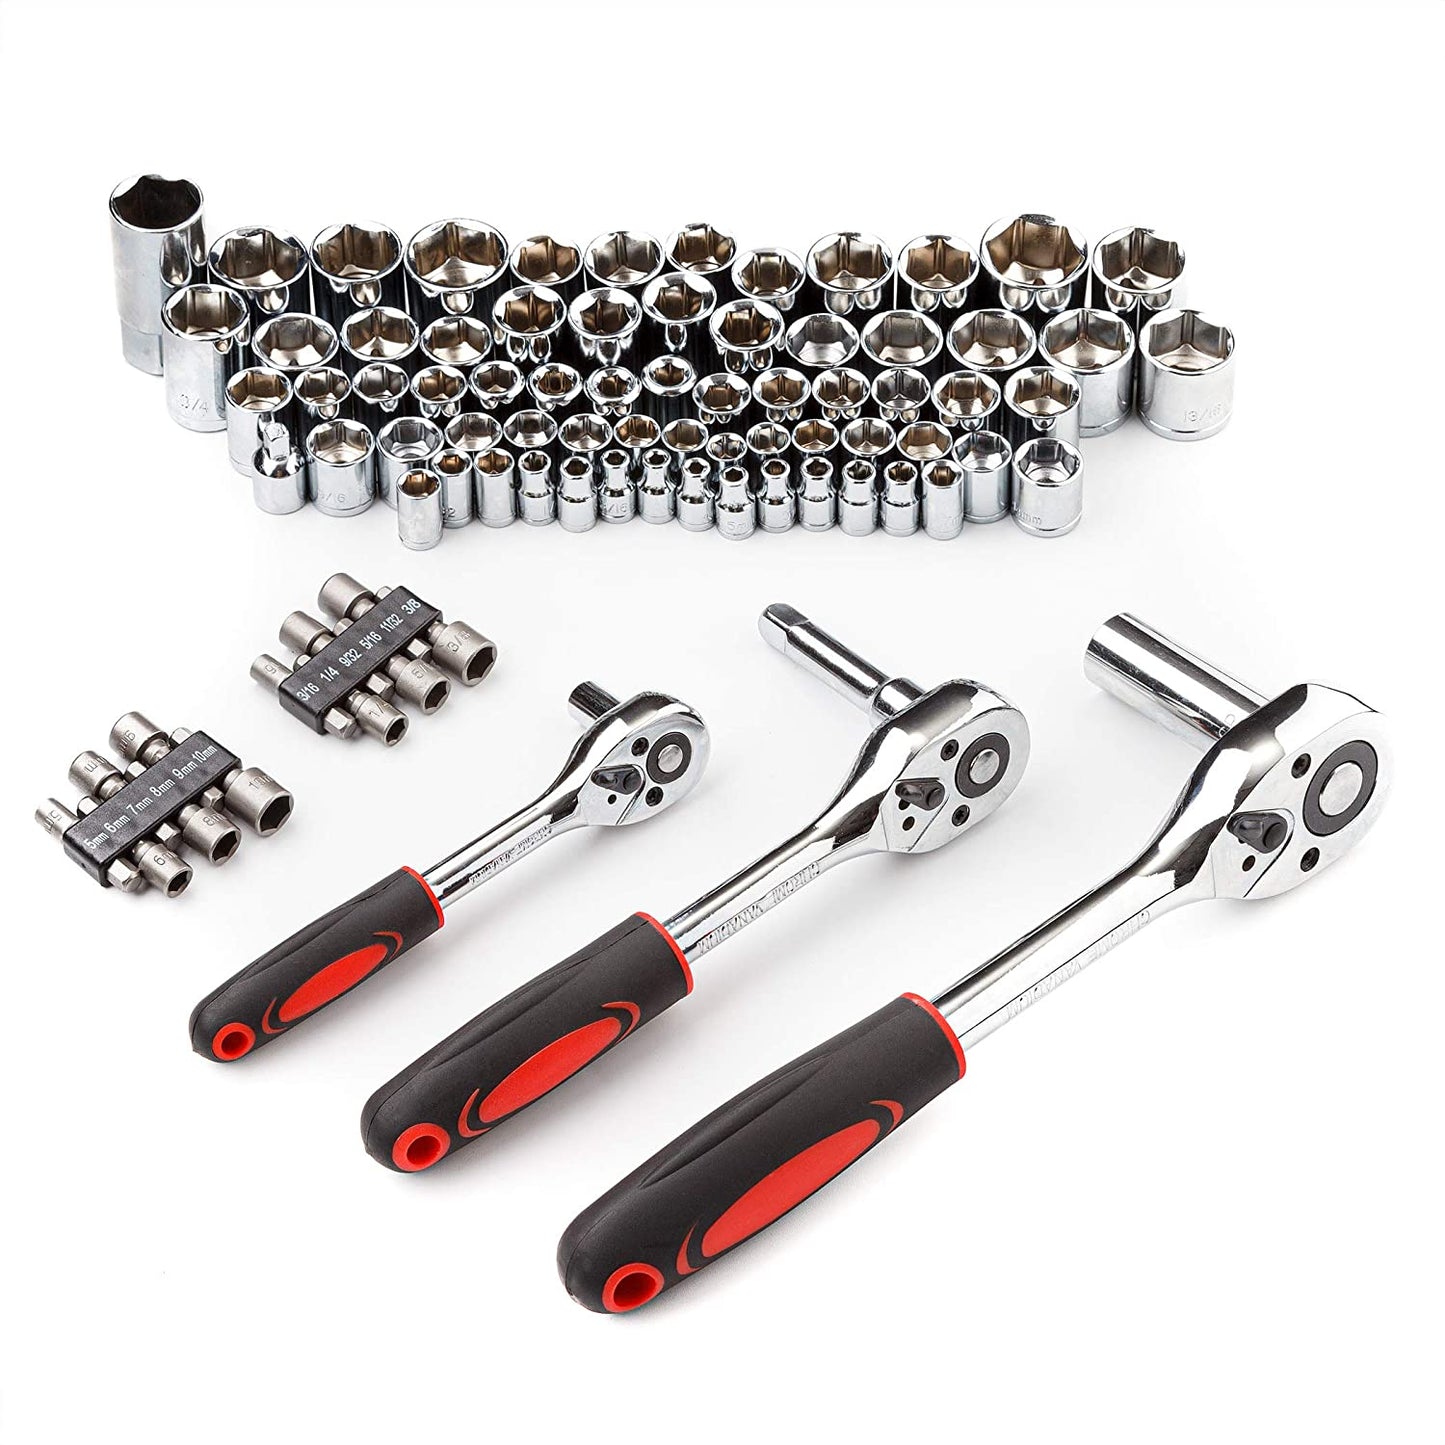 Cartman Tool Set 205Pcs Red Ratchet Wrench with Sockets Kit Set in Plastic Toolbox